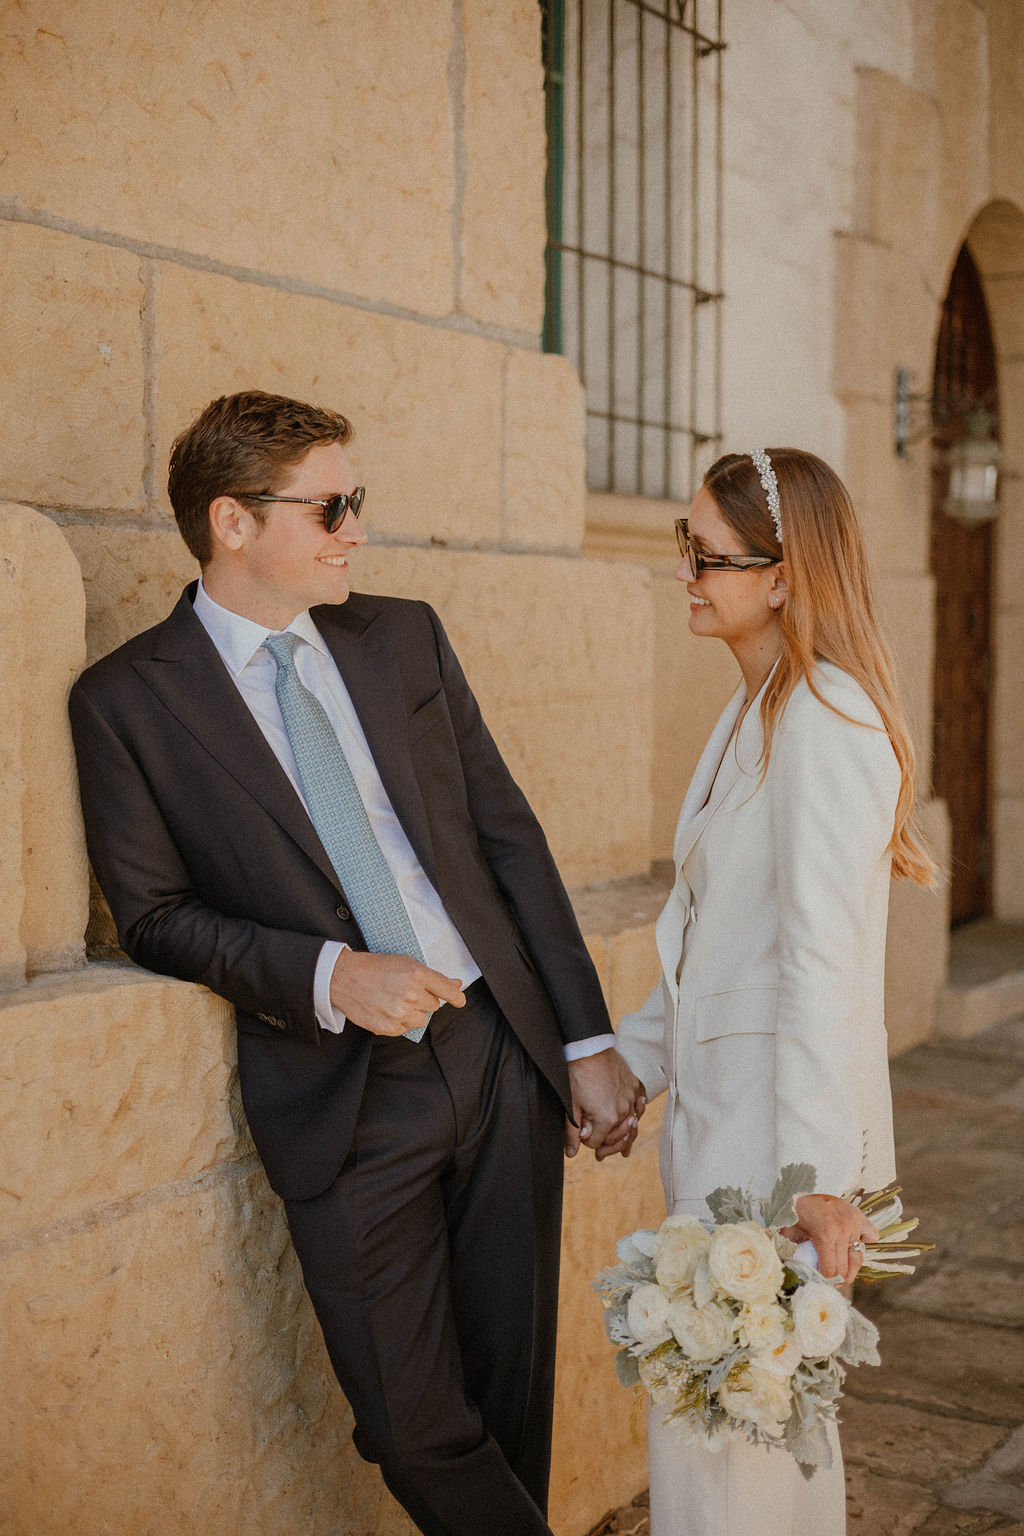 the couple looking at each other with their sunglasses on